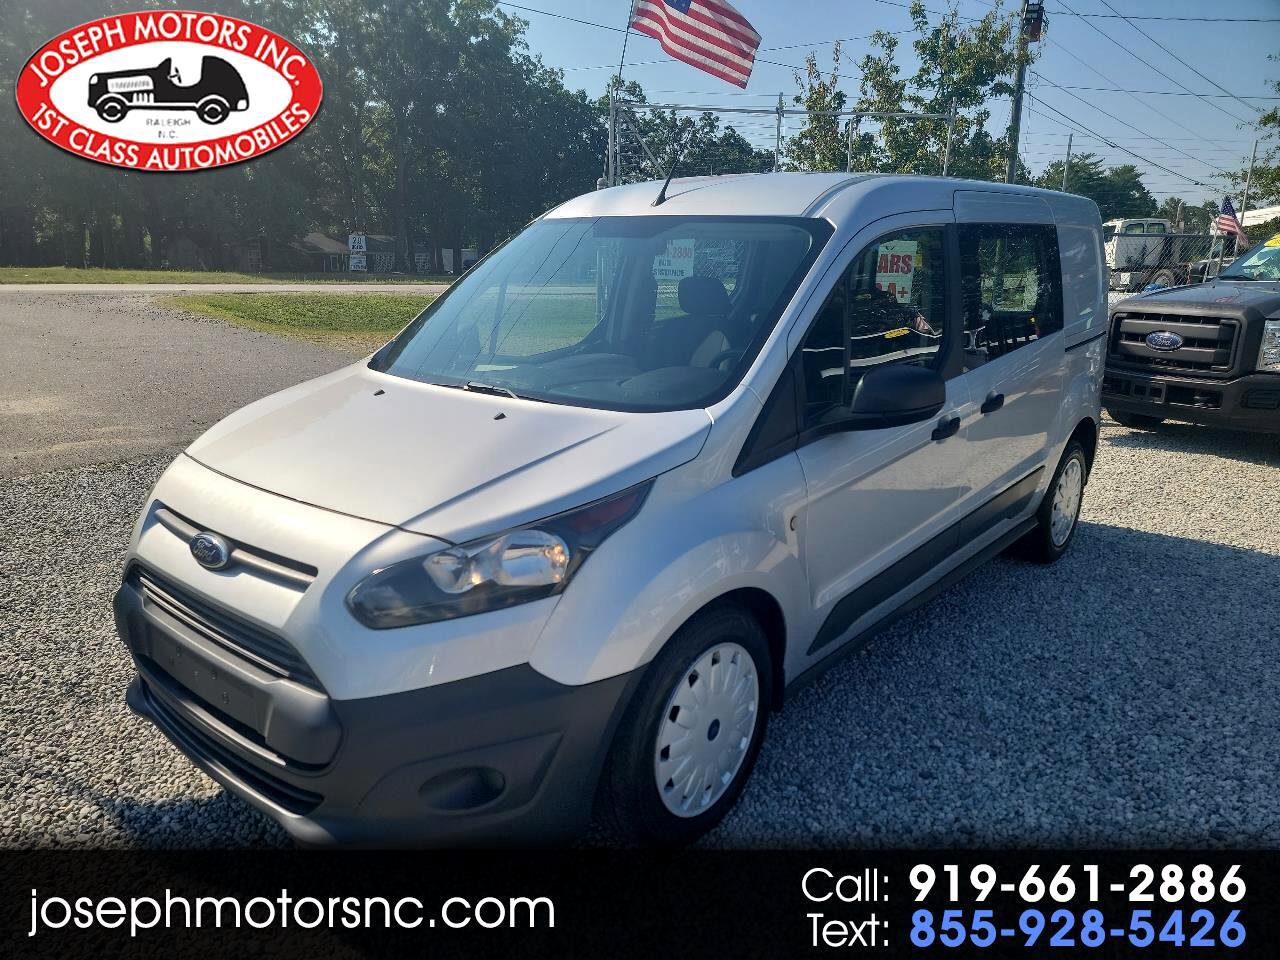 Used Ford Transit Connect for Sale Near Me in Goldsboro, NC - Autotrader